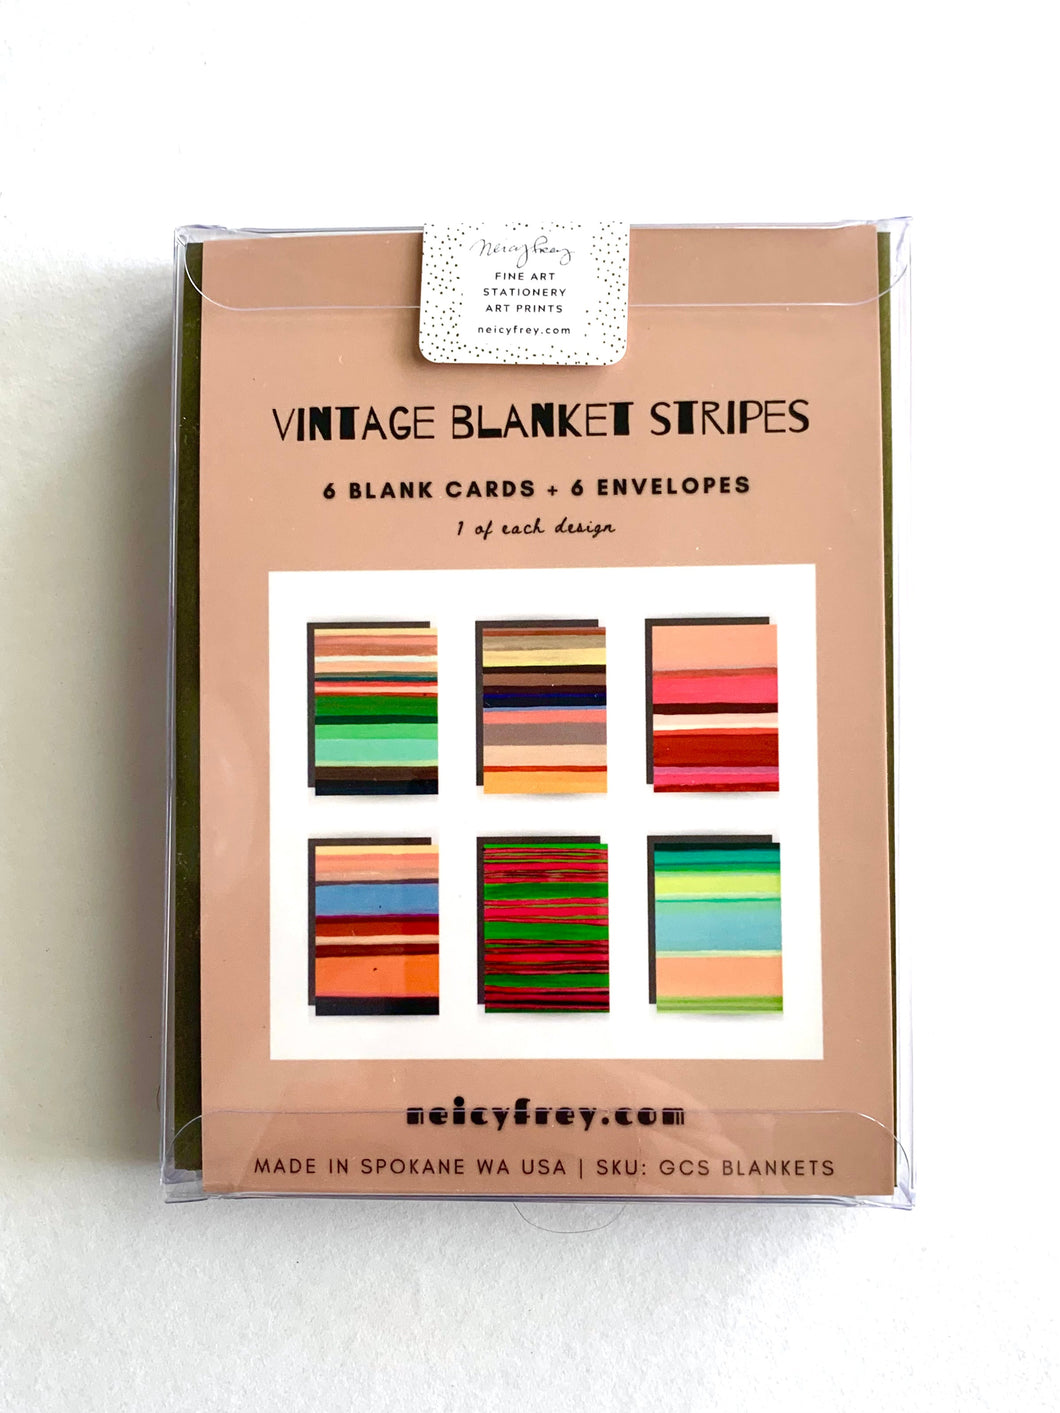 NF GCS Cozy / Cozy Blanket Stripes Assorted Boxed Card Set of 6 / $11 each